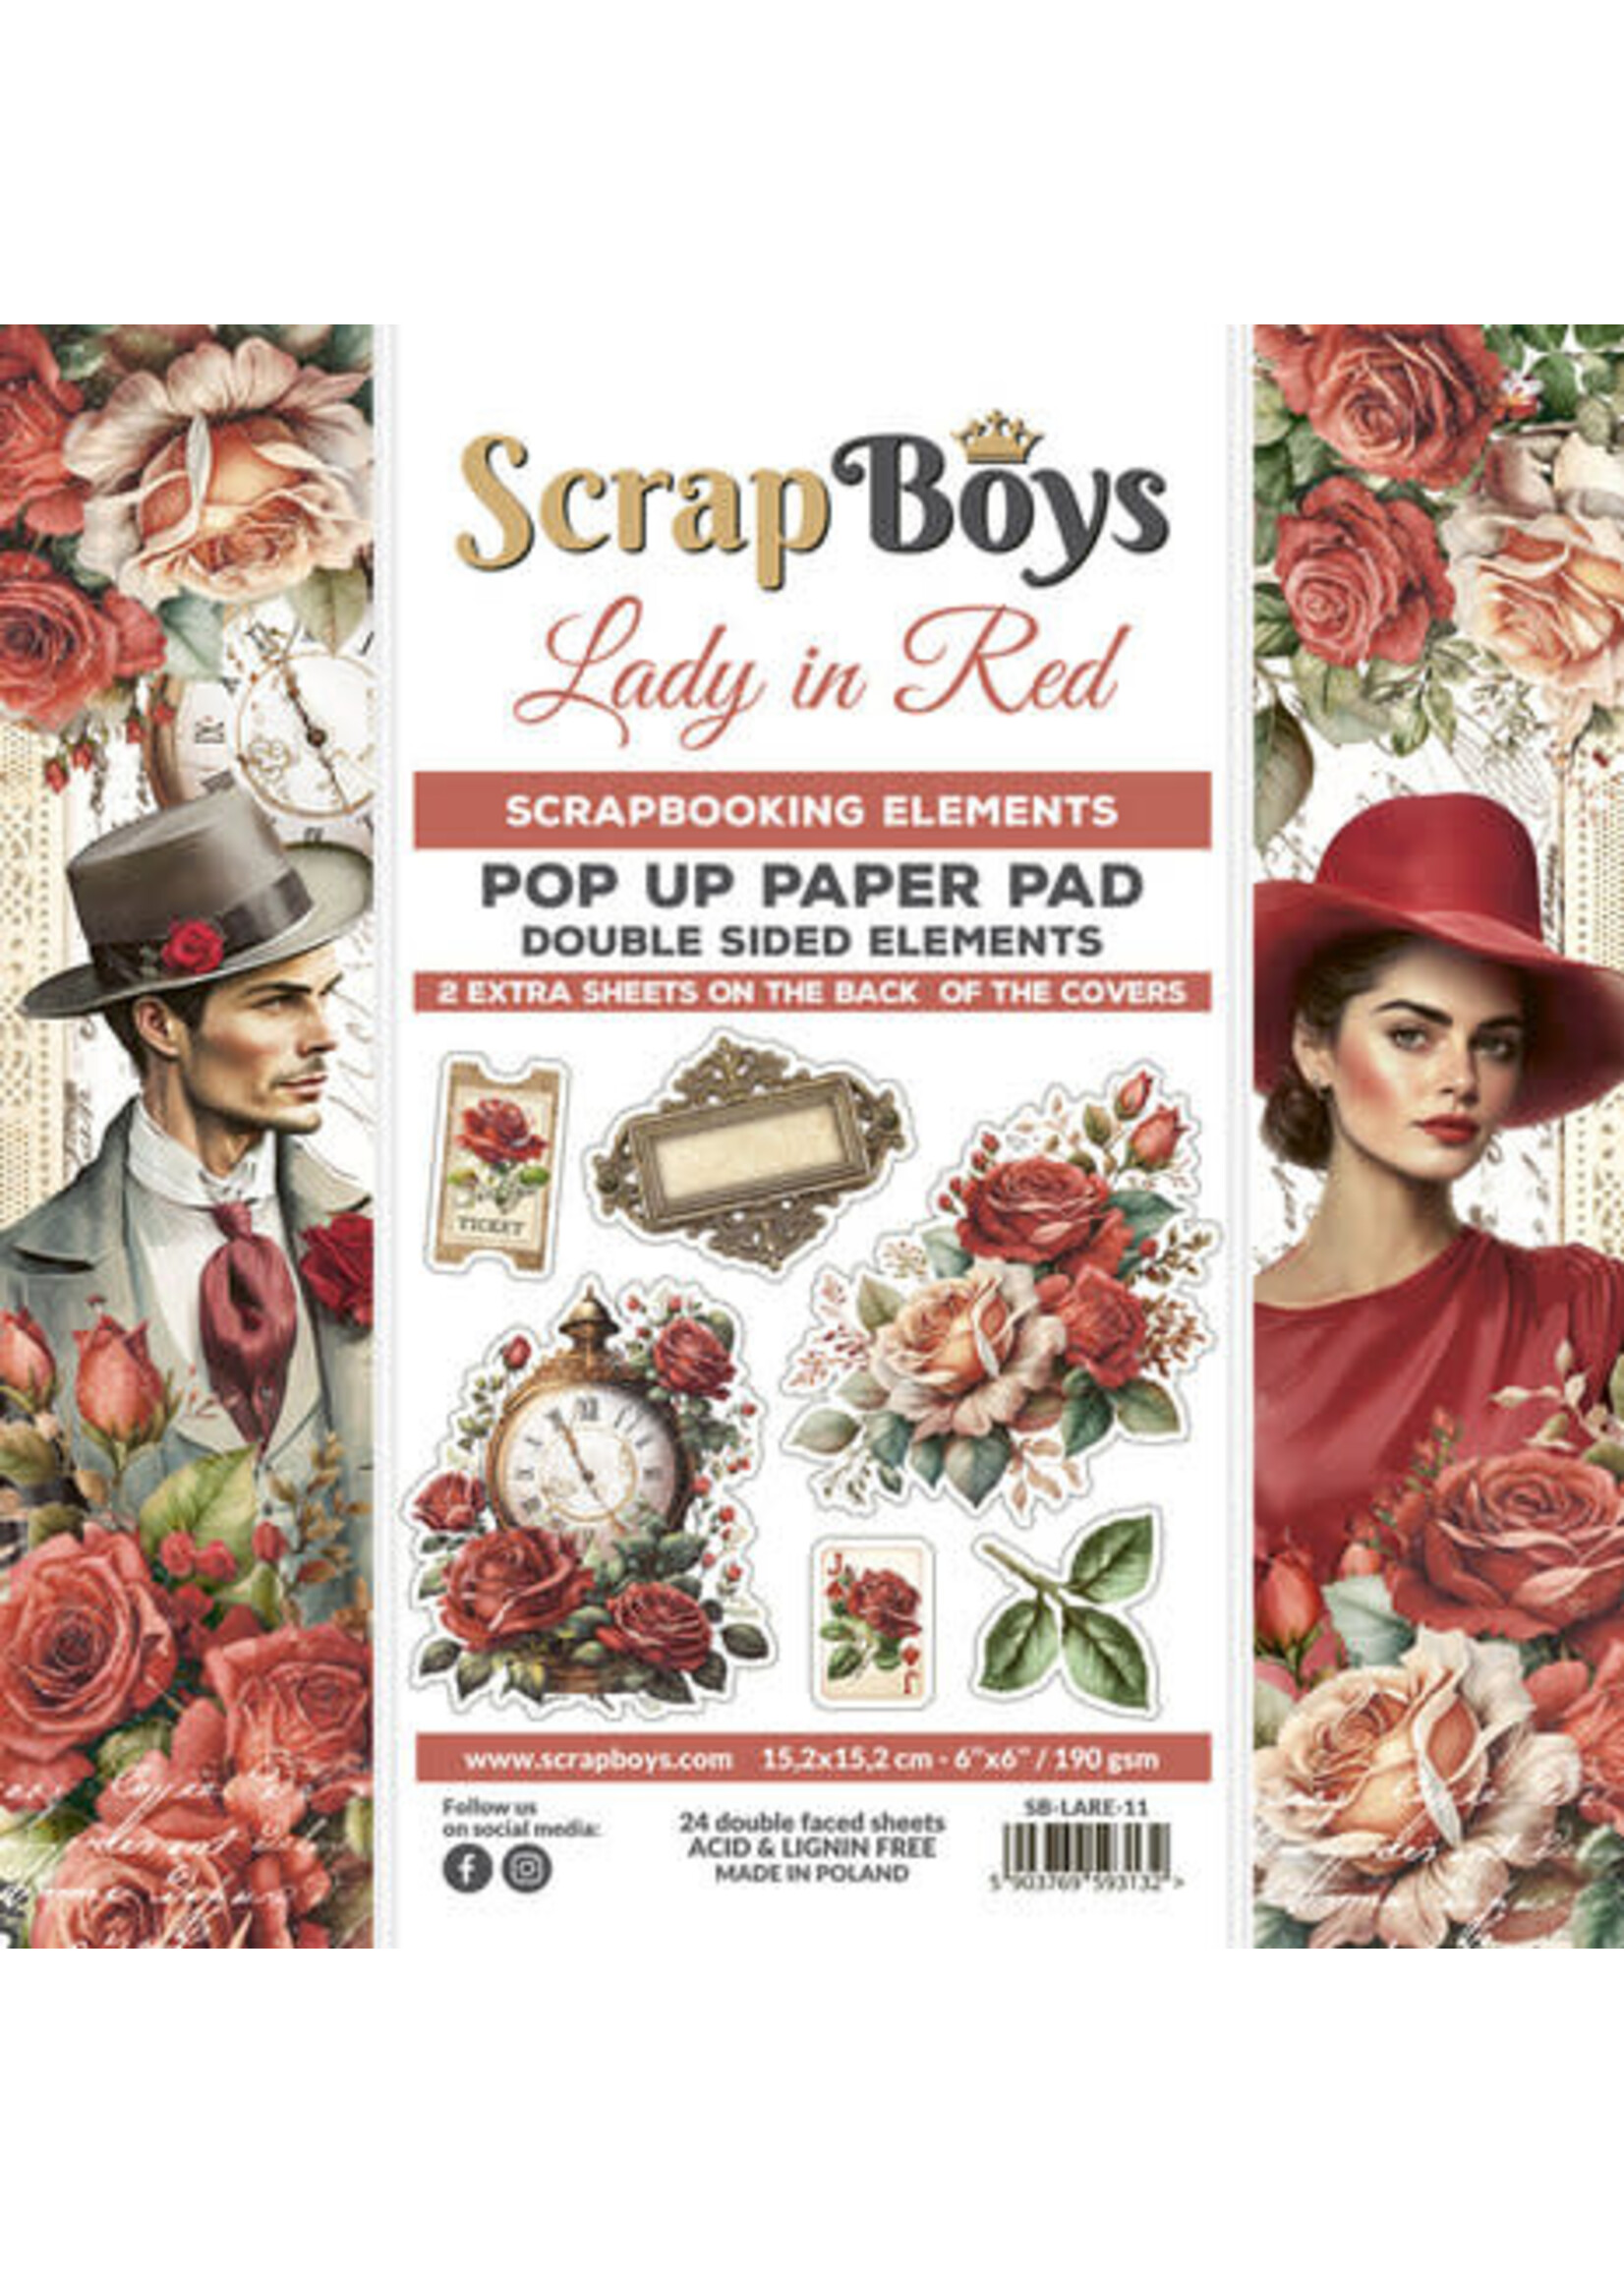 Scrapboys Lady in Red 6x6 Inch Pop Up Paper Pad (SB-LARE-11)